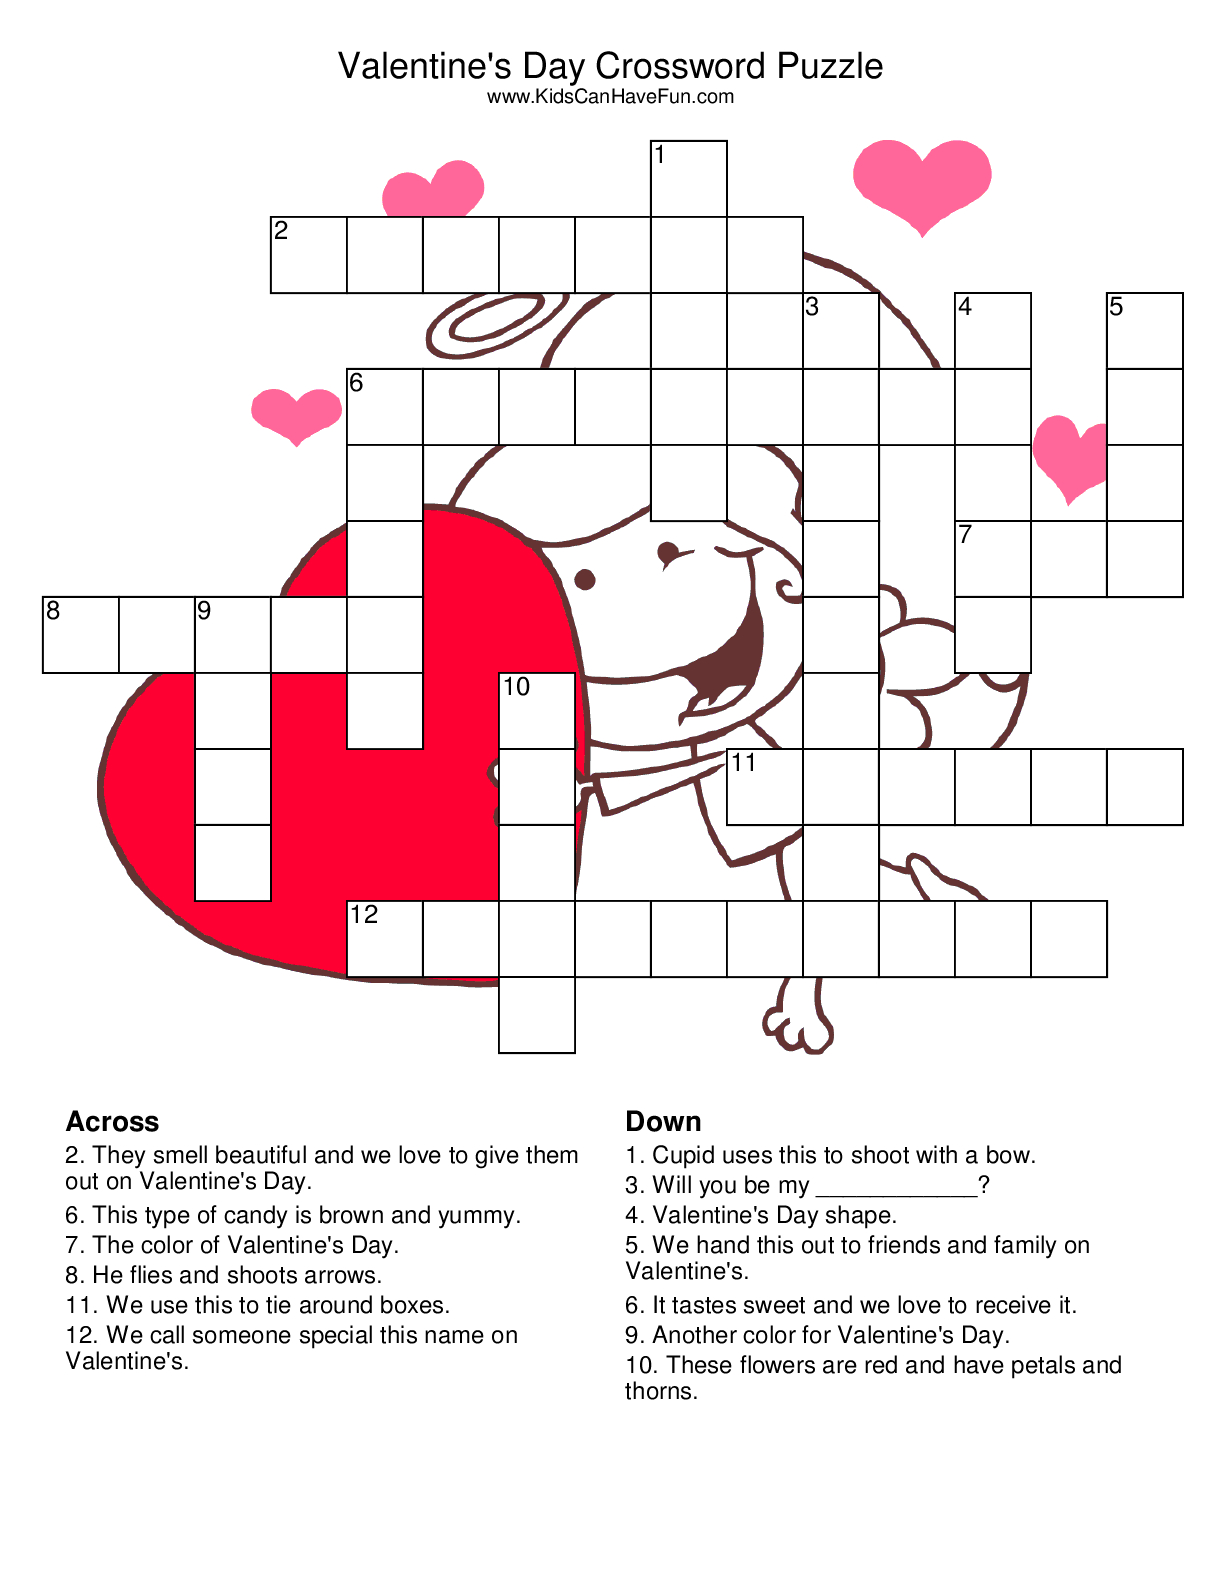 What A Great Way To Spend The Night With Your Love Then Being Smart - Printable Love Crossword Puzzles